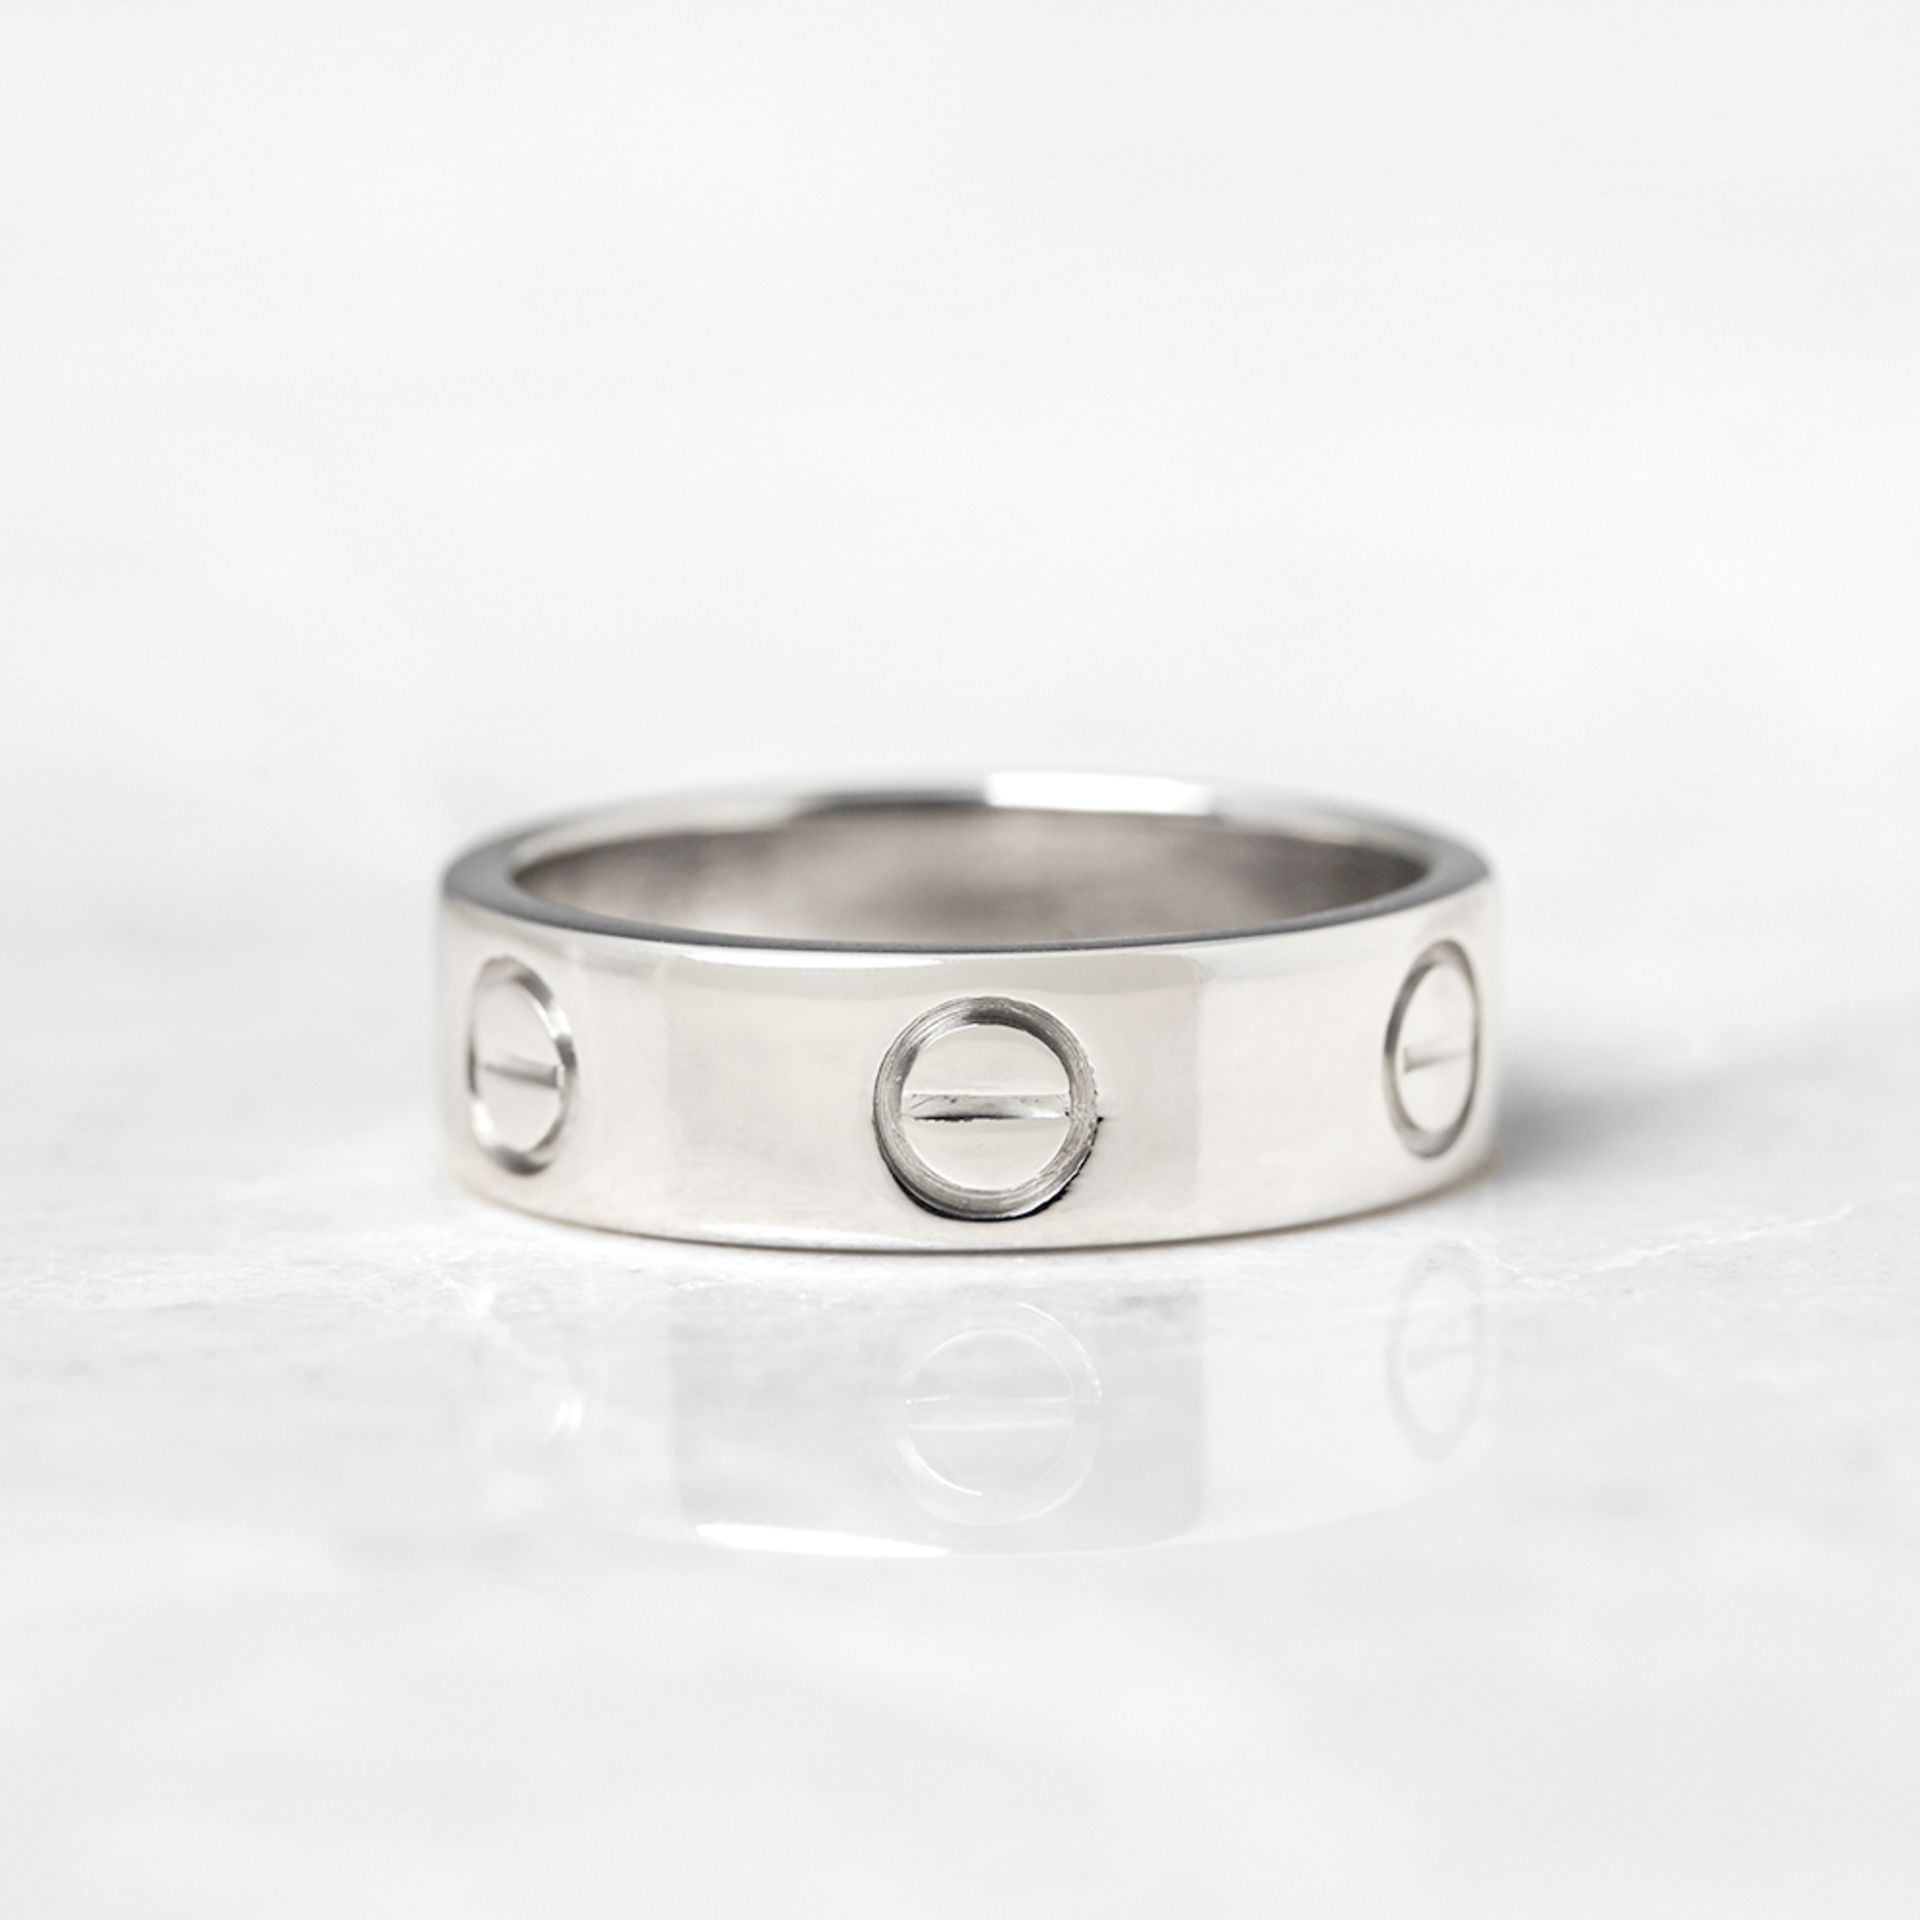 Cartier 18k White Gold Love Ring - Image 3 of 6